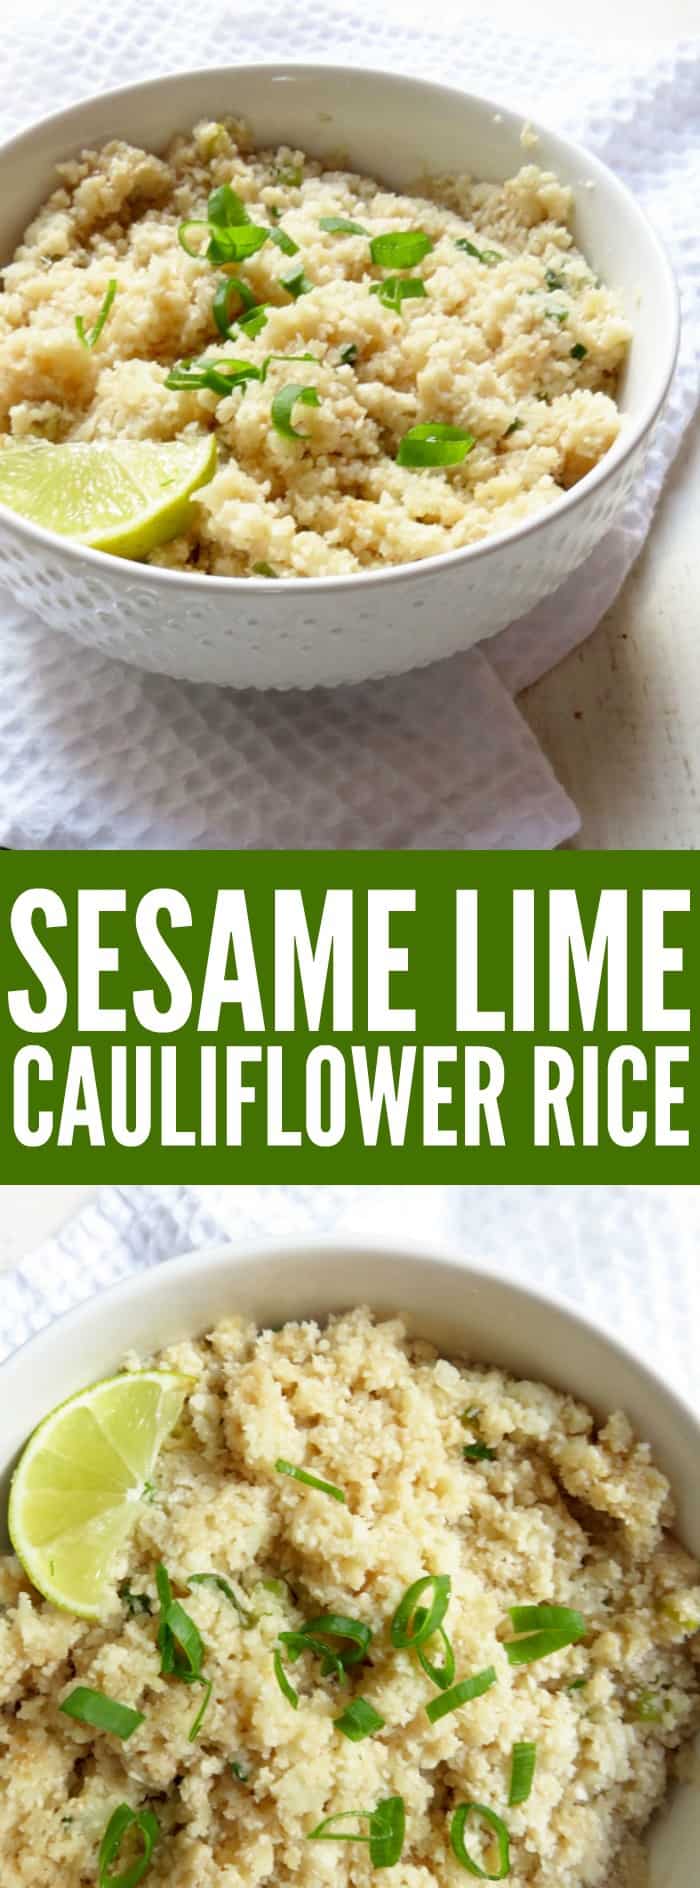 You will love this recipe for Sesame Lime Cauliflower Rice! It's the perfect healthy side dish to replace your traditional rice and it's so flavorful! thetoastedpinenut.com #lowcarb #glutenfree #healthy